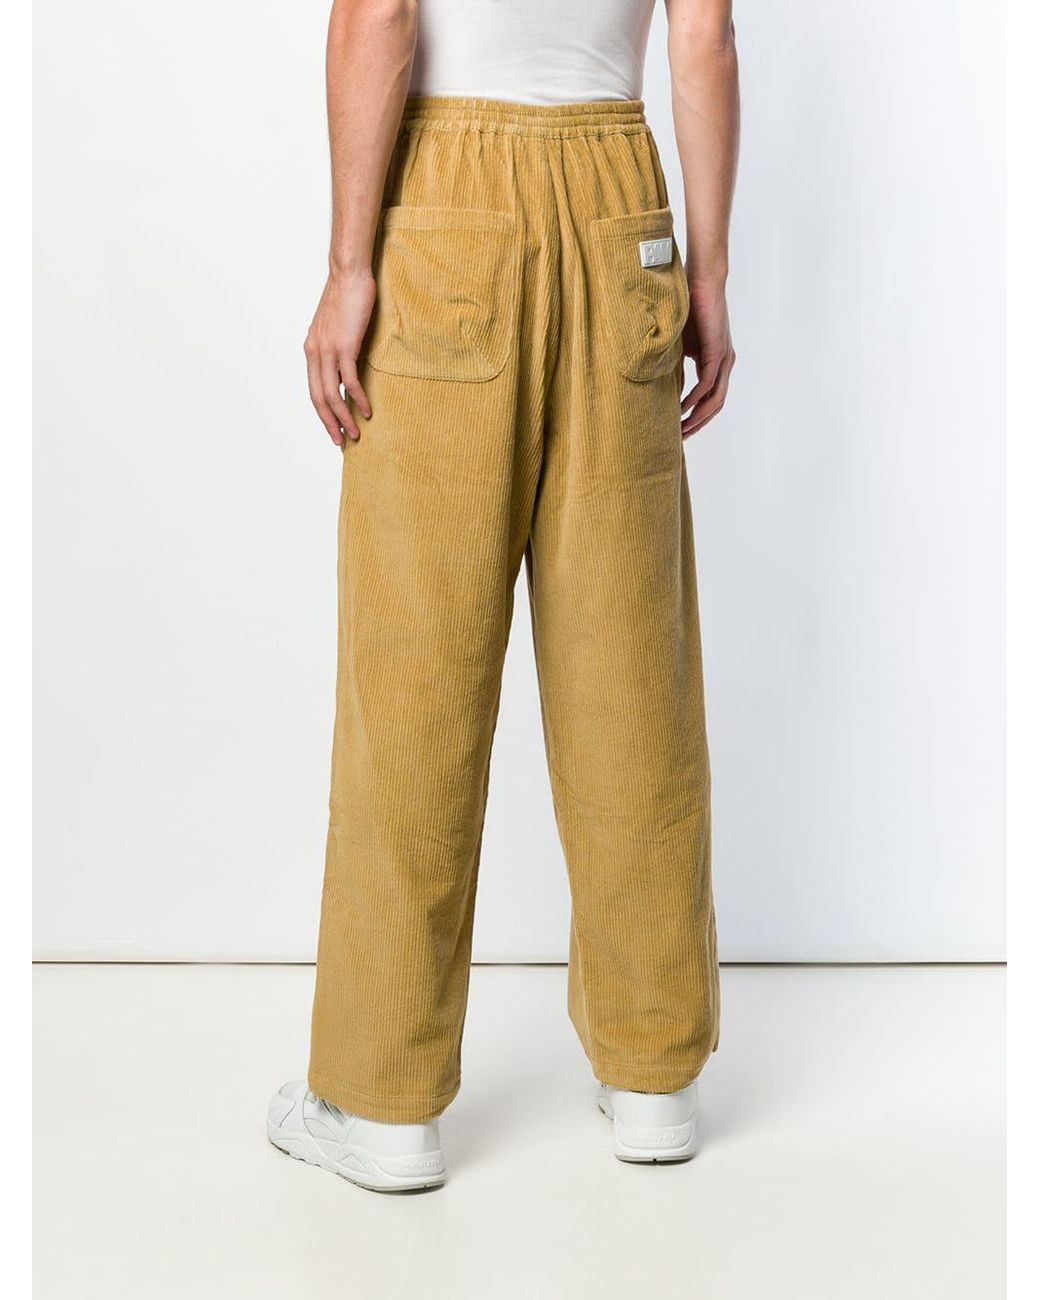 P.a.m. Perks And Mini Return Corduroy Trousers in Yellow for Men 